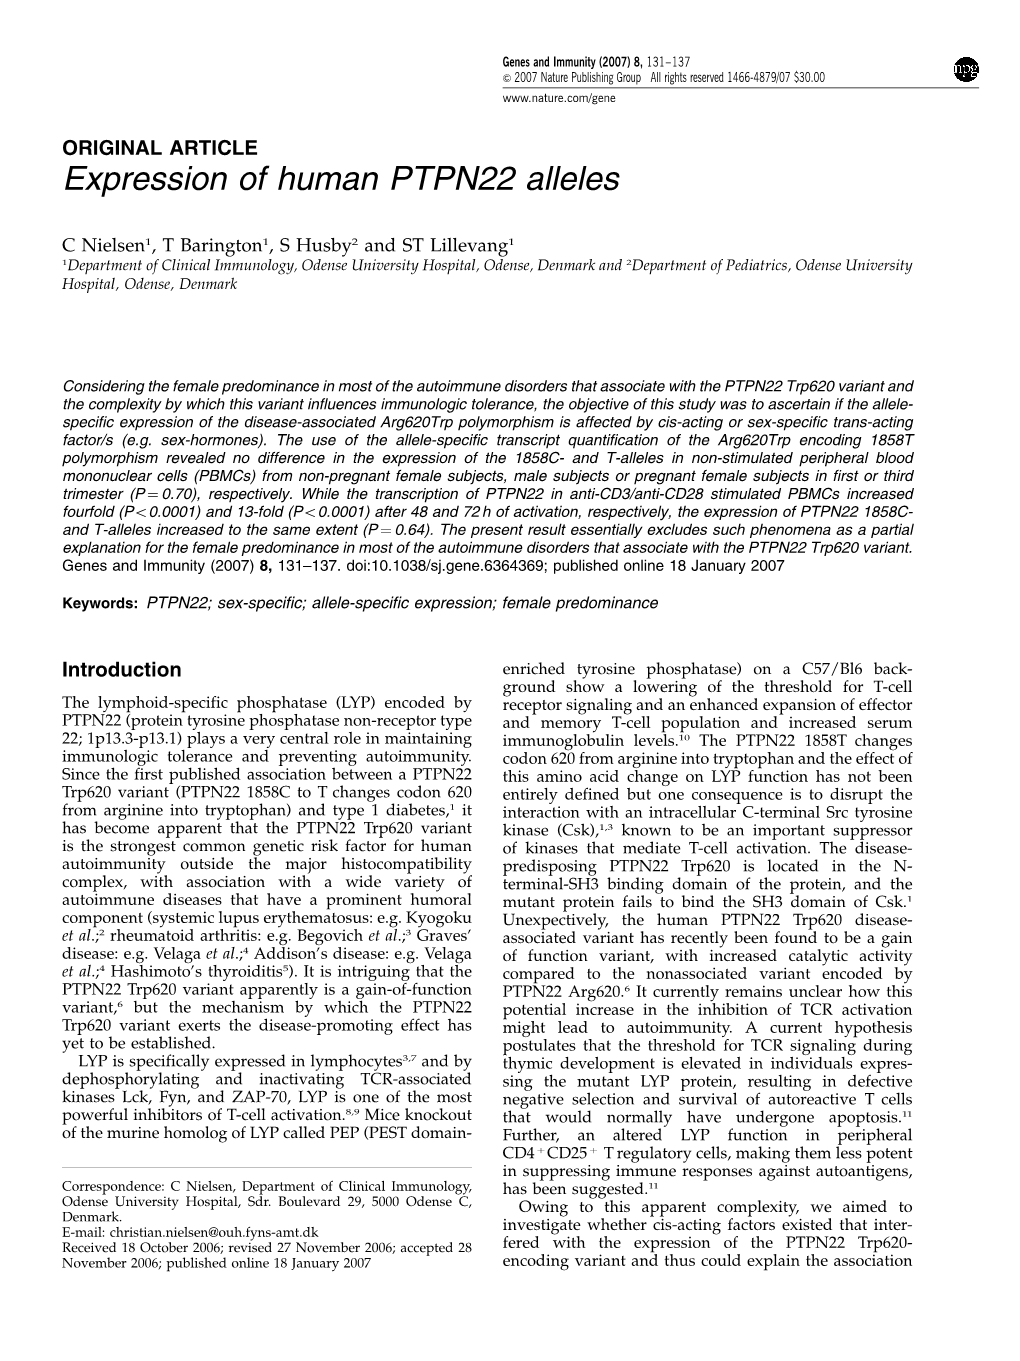 Expression of Human PTPN22 Alleles